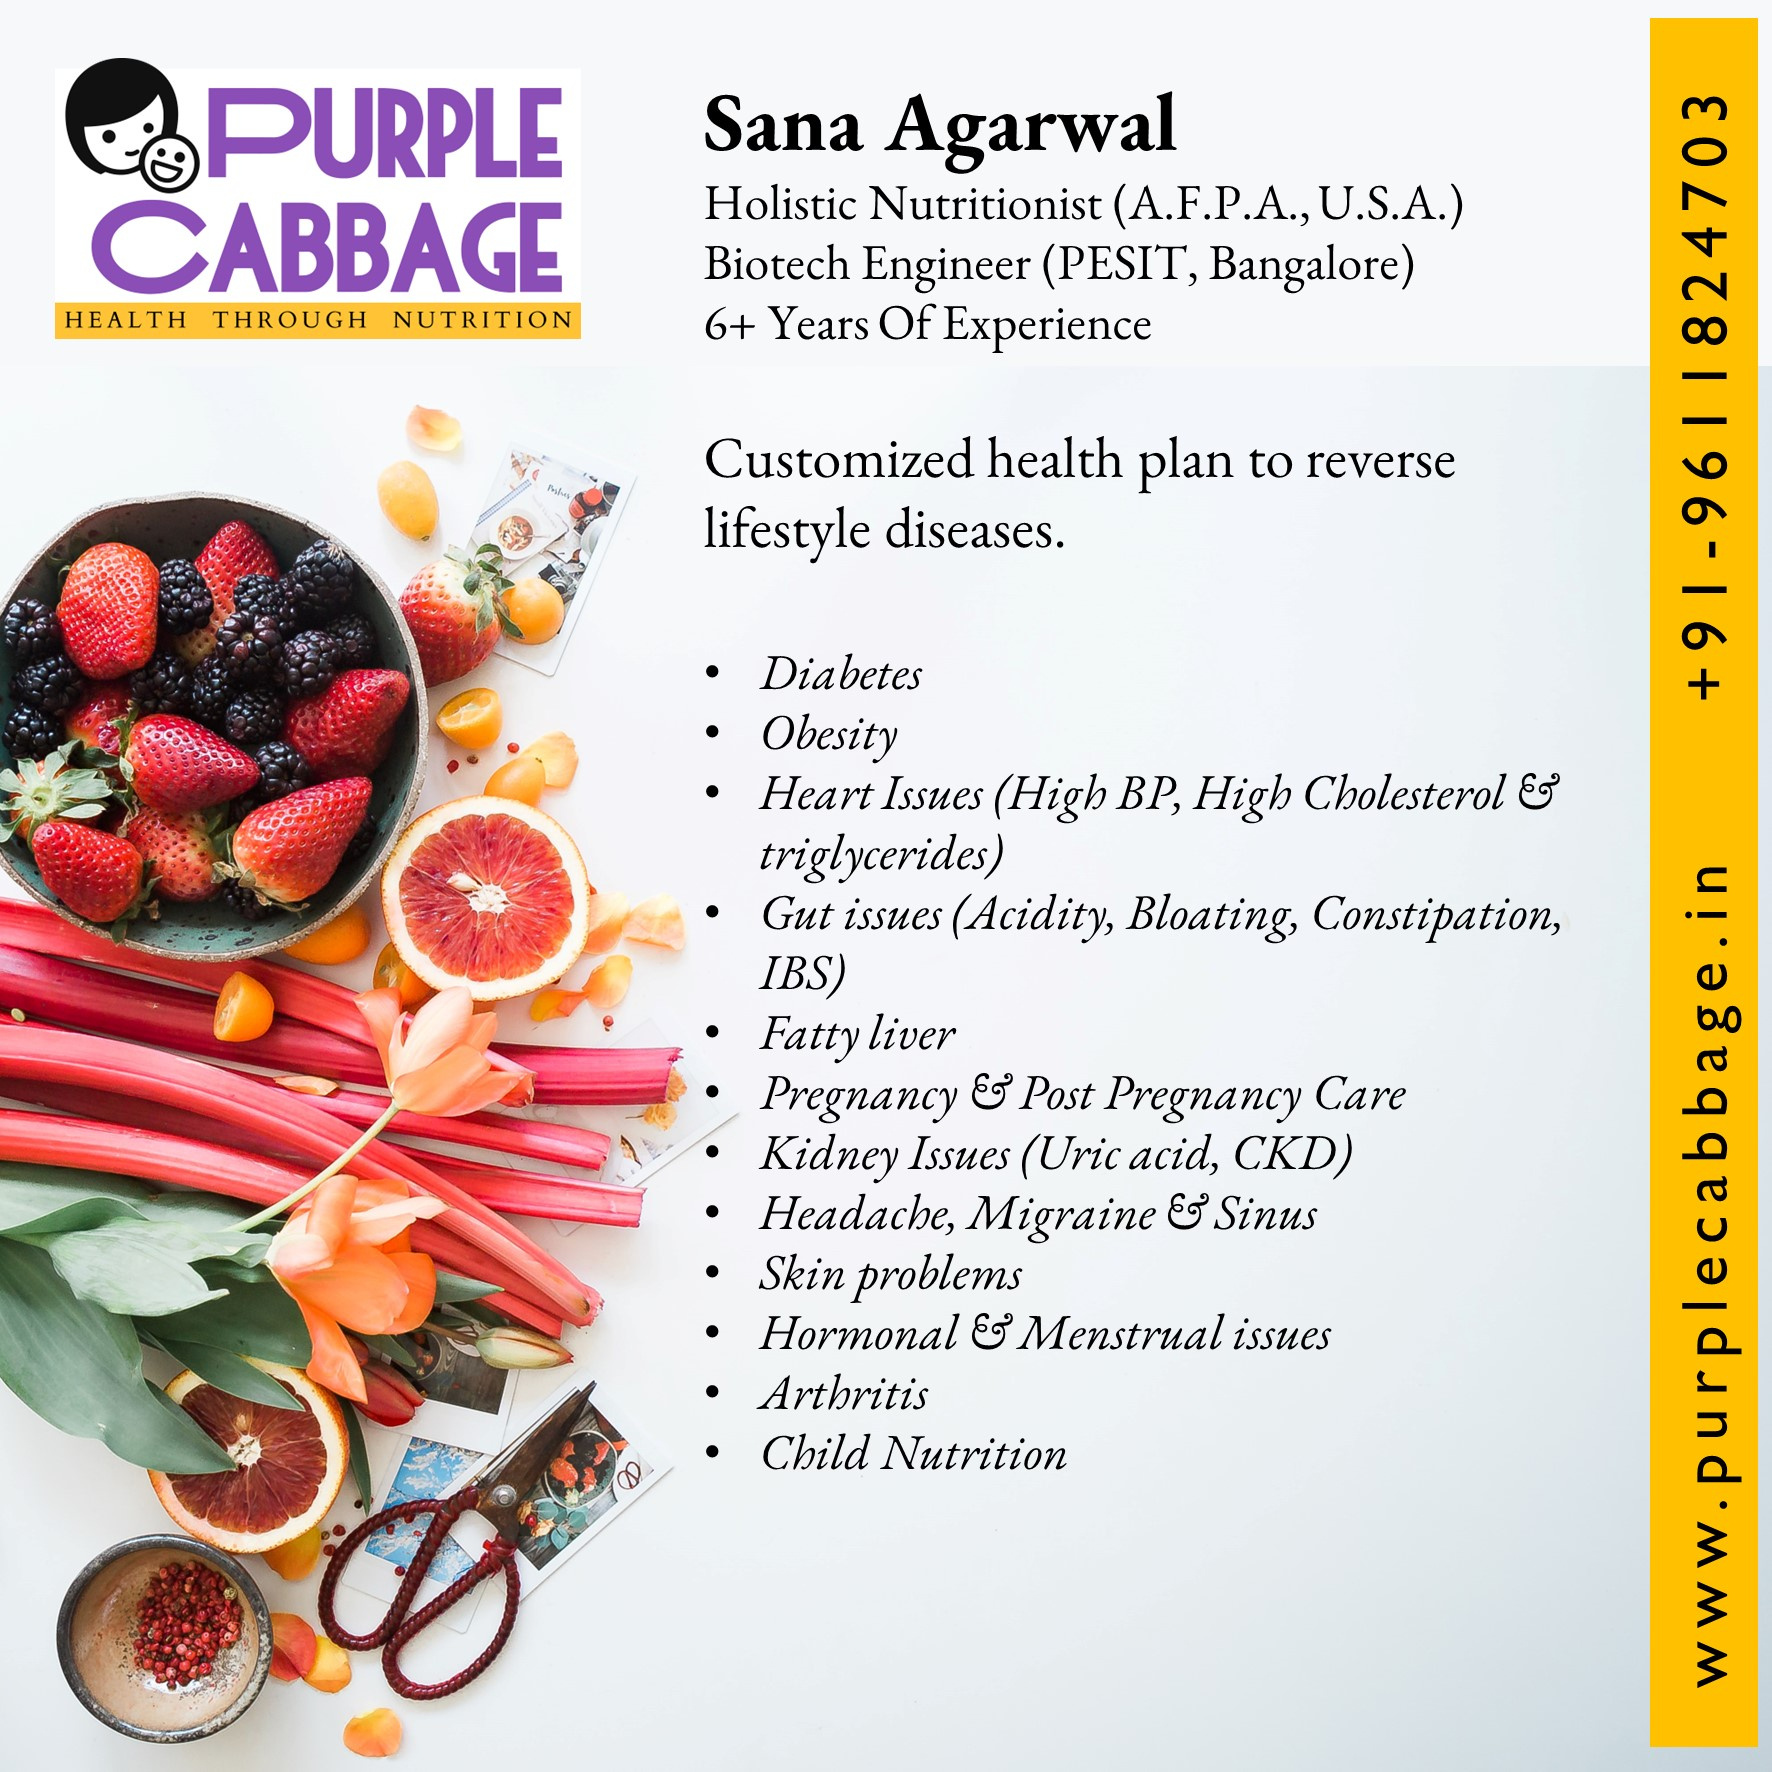 Sana Agarwal Holistic Nutritionist (A.F.P.A., U.S.A.) Biotech Engineer (PESIT, Bangalore) 6+ Years Of Experience Customized health plan to reverse lifestyle diseases. Diabetes Obesity Heart Issues (High BP, High Cholesterol & triglycerides) Gut issues (A